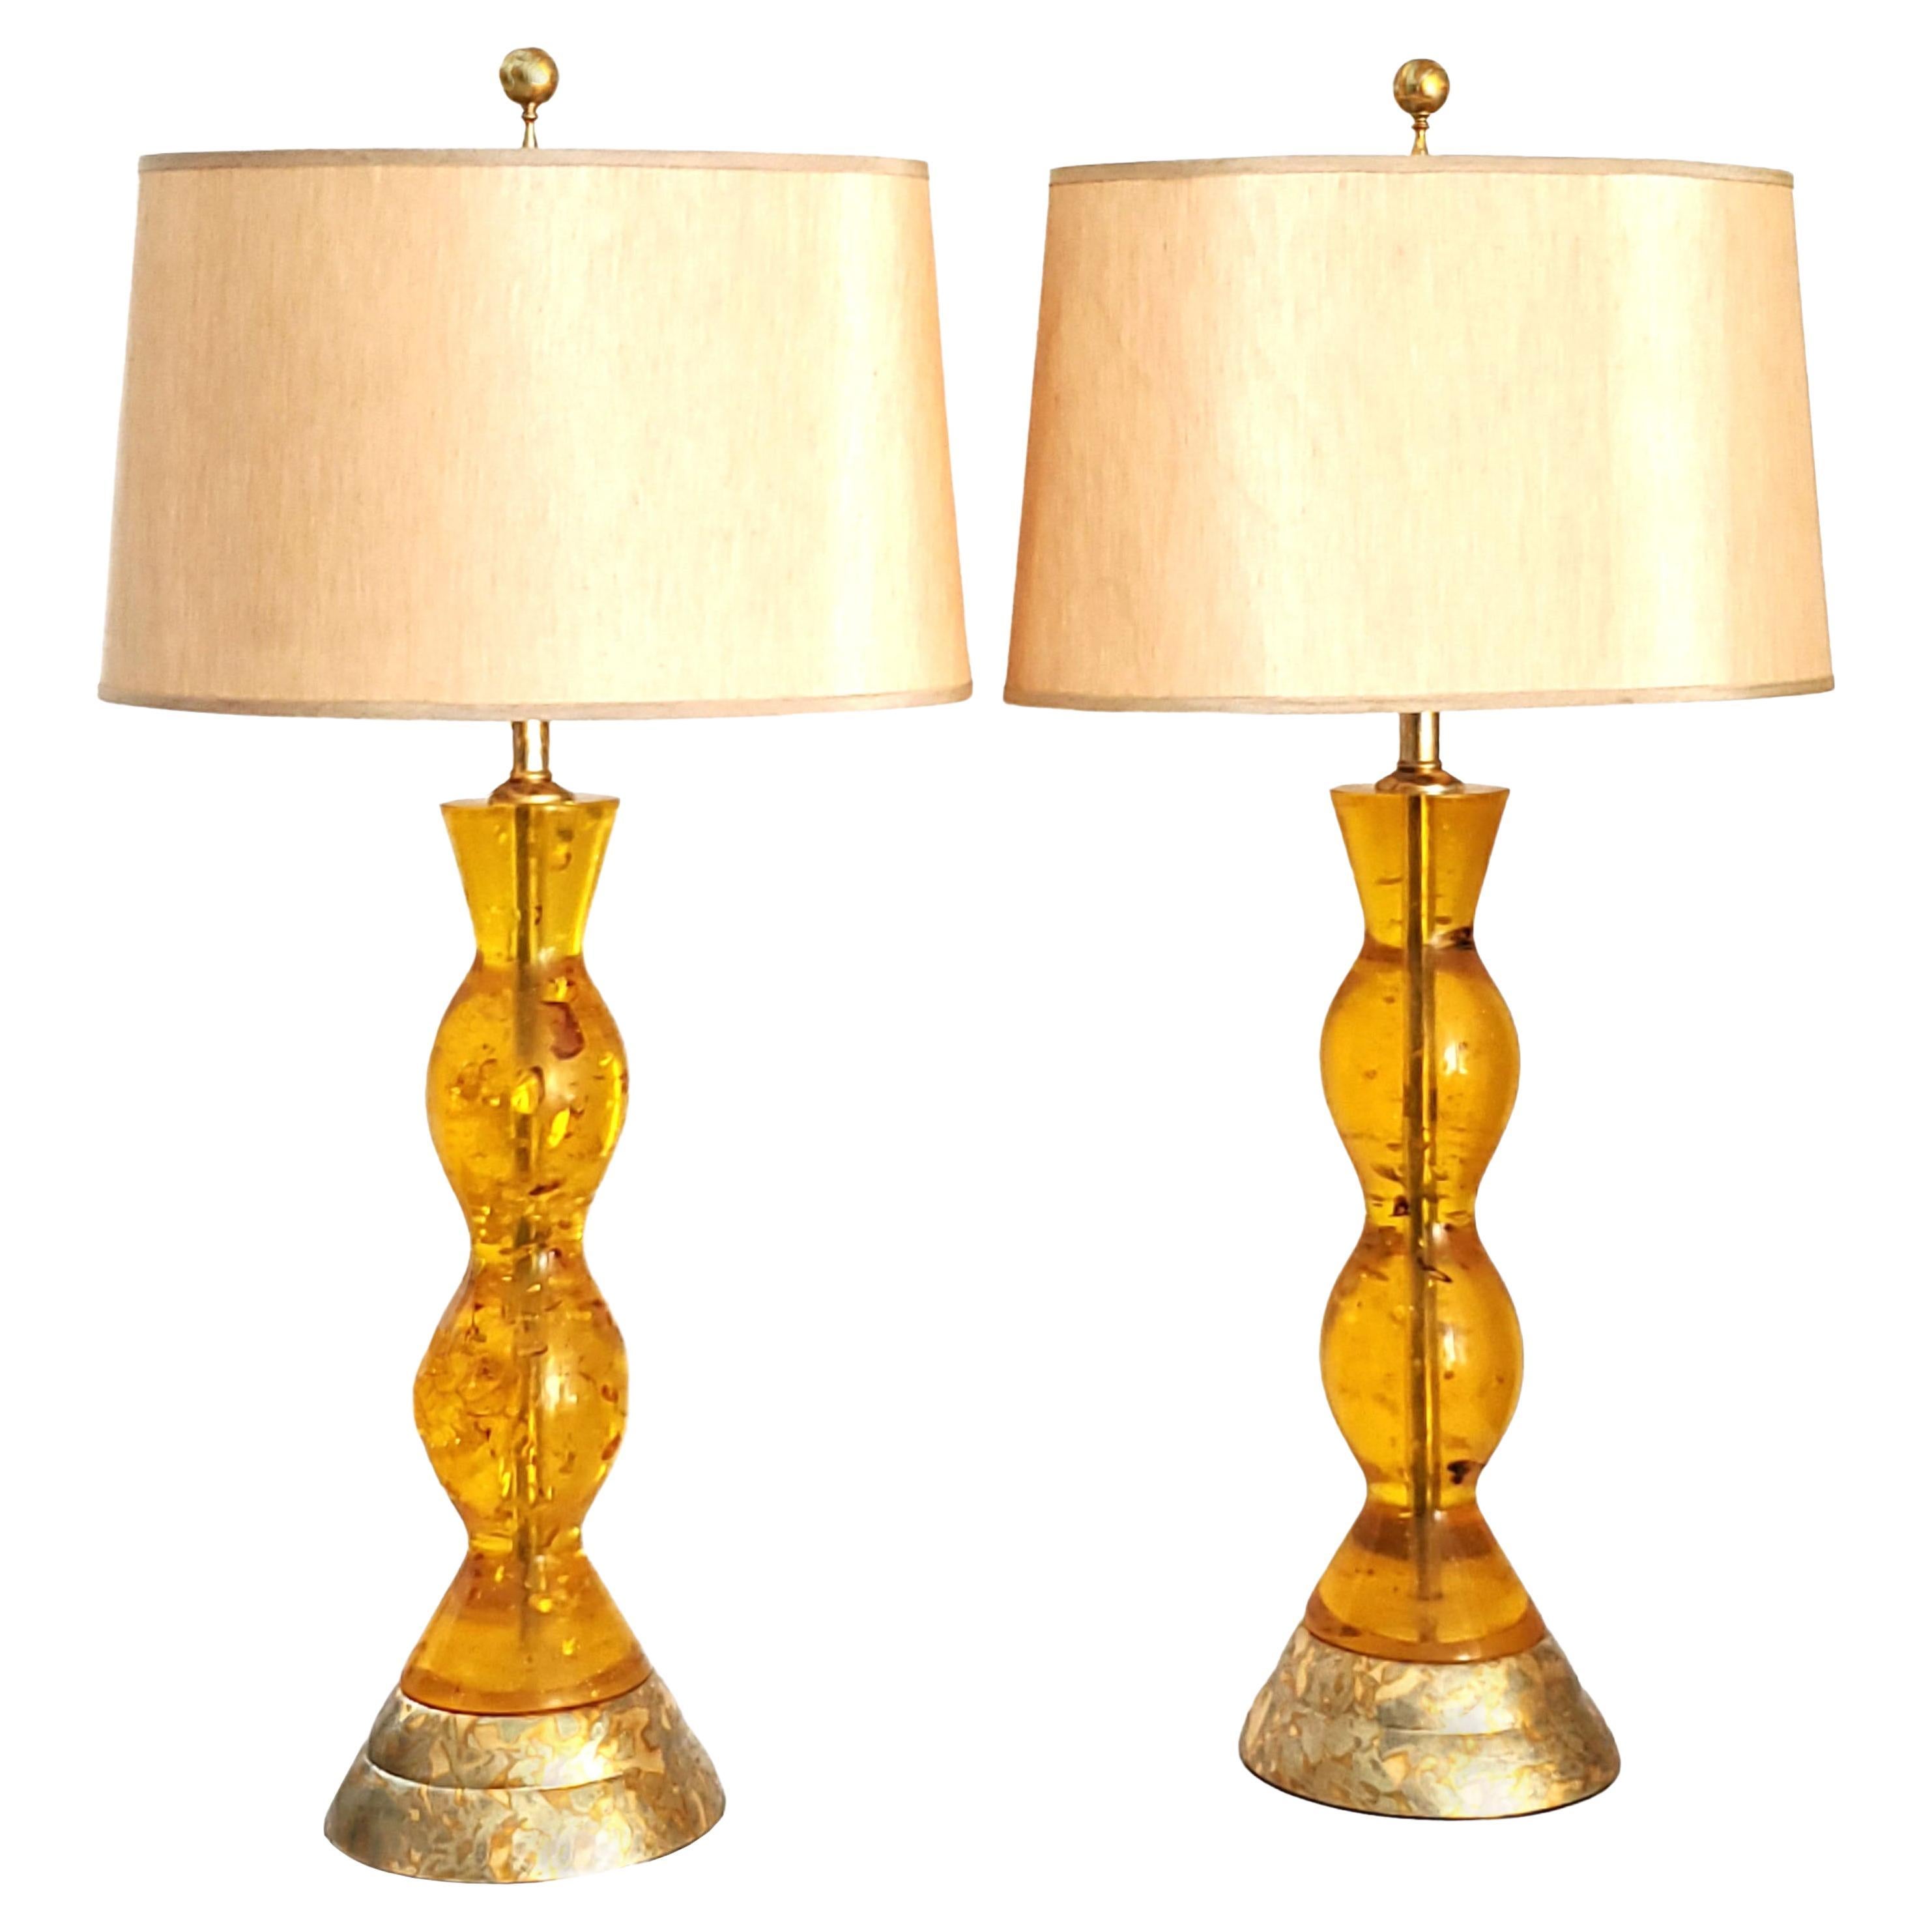 Pair Vintage Amber Colored Lucite Table Lamps with Gold Leaf Bases and Finials